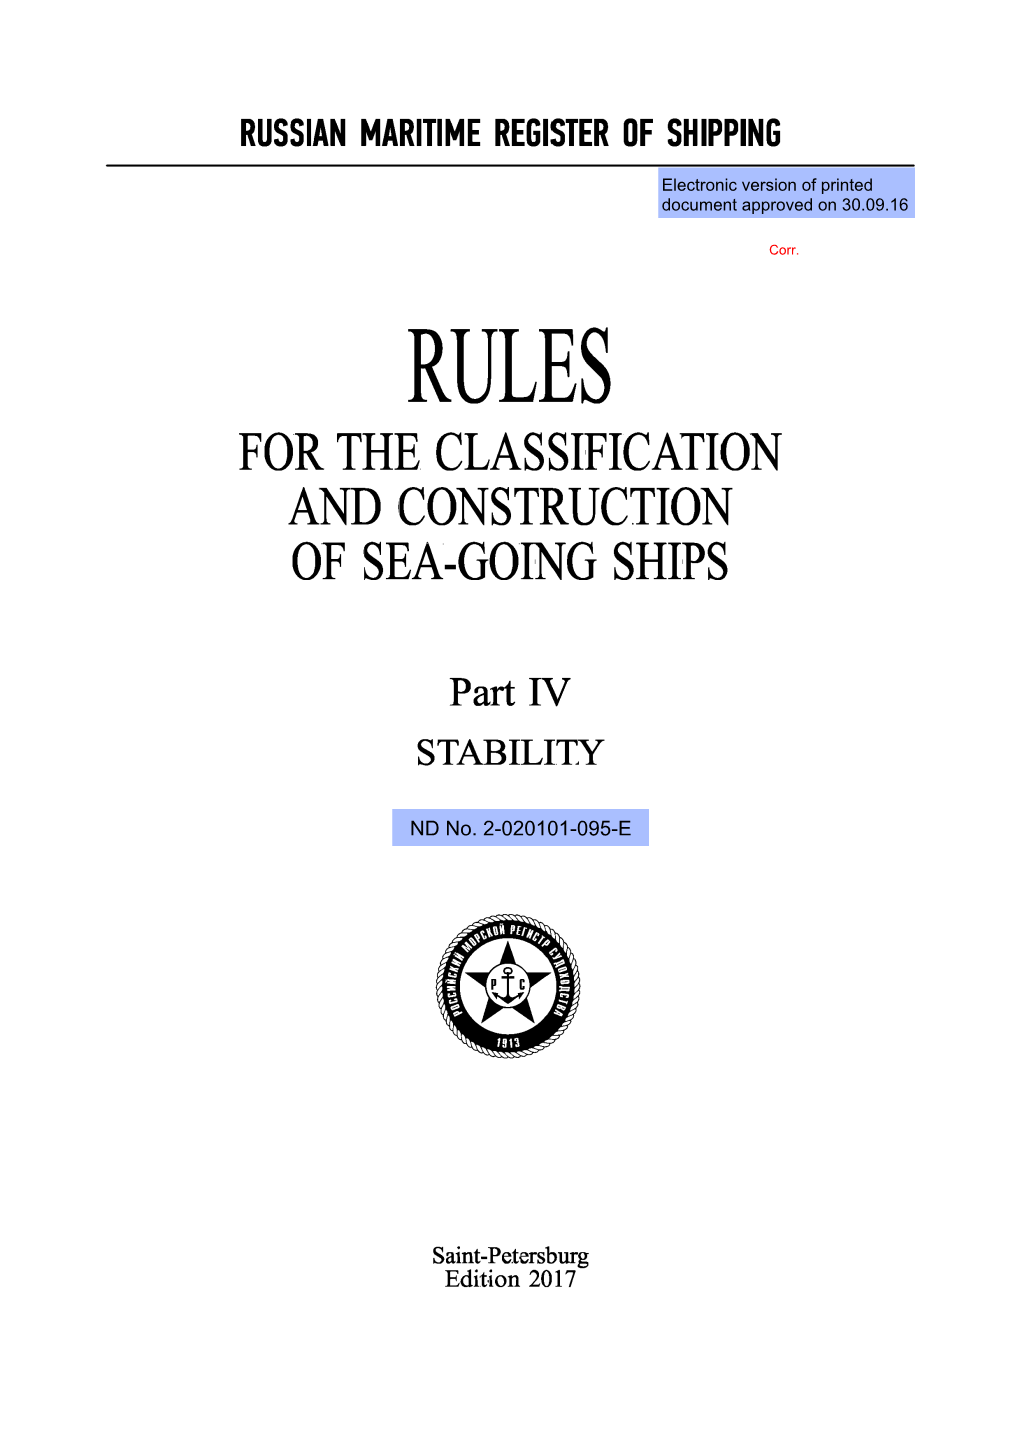 Rules for the Classification and Construction of Sea-Going Ships